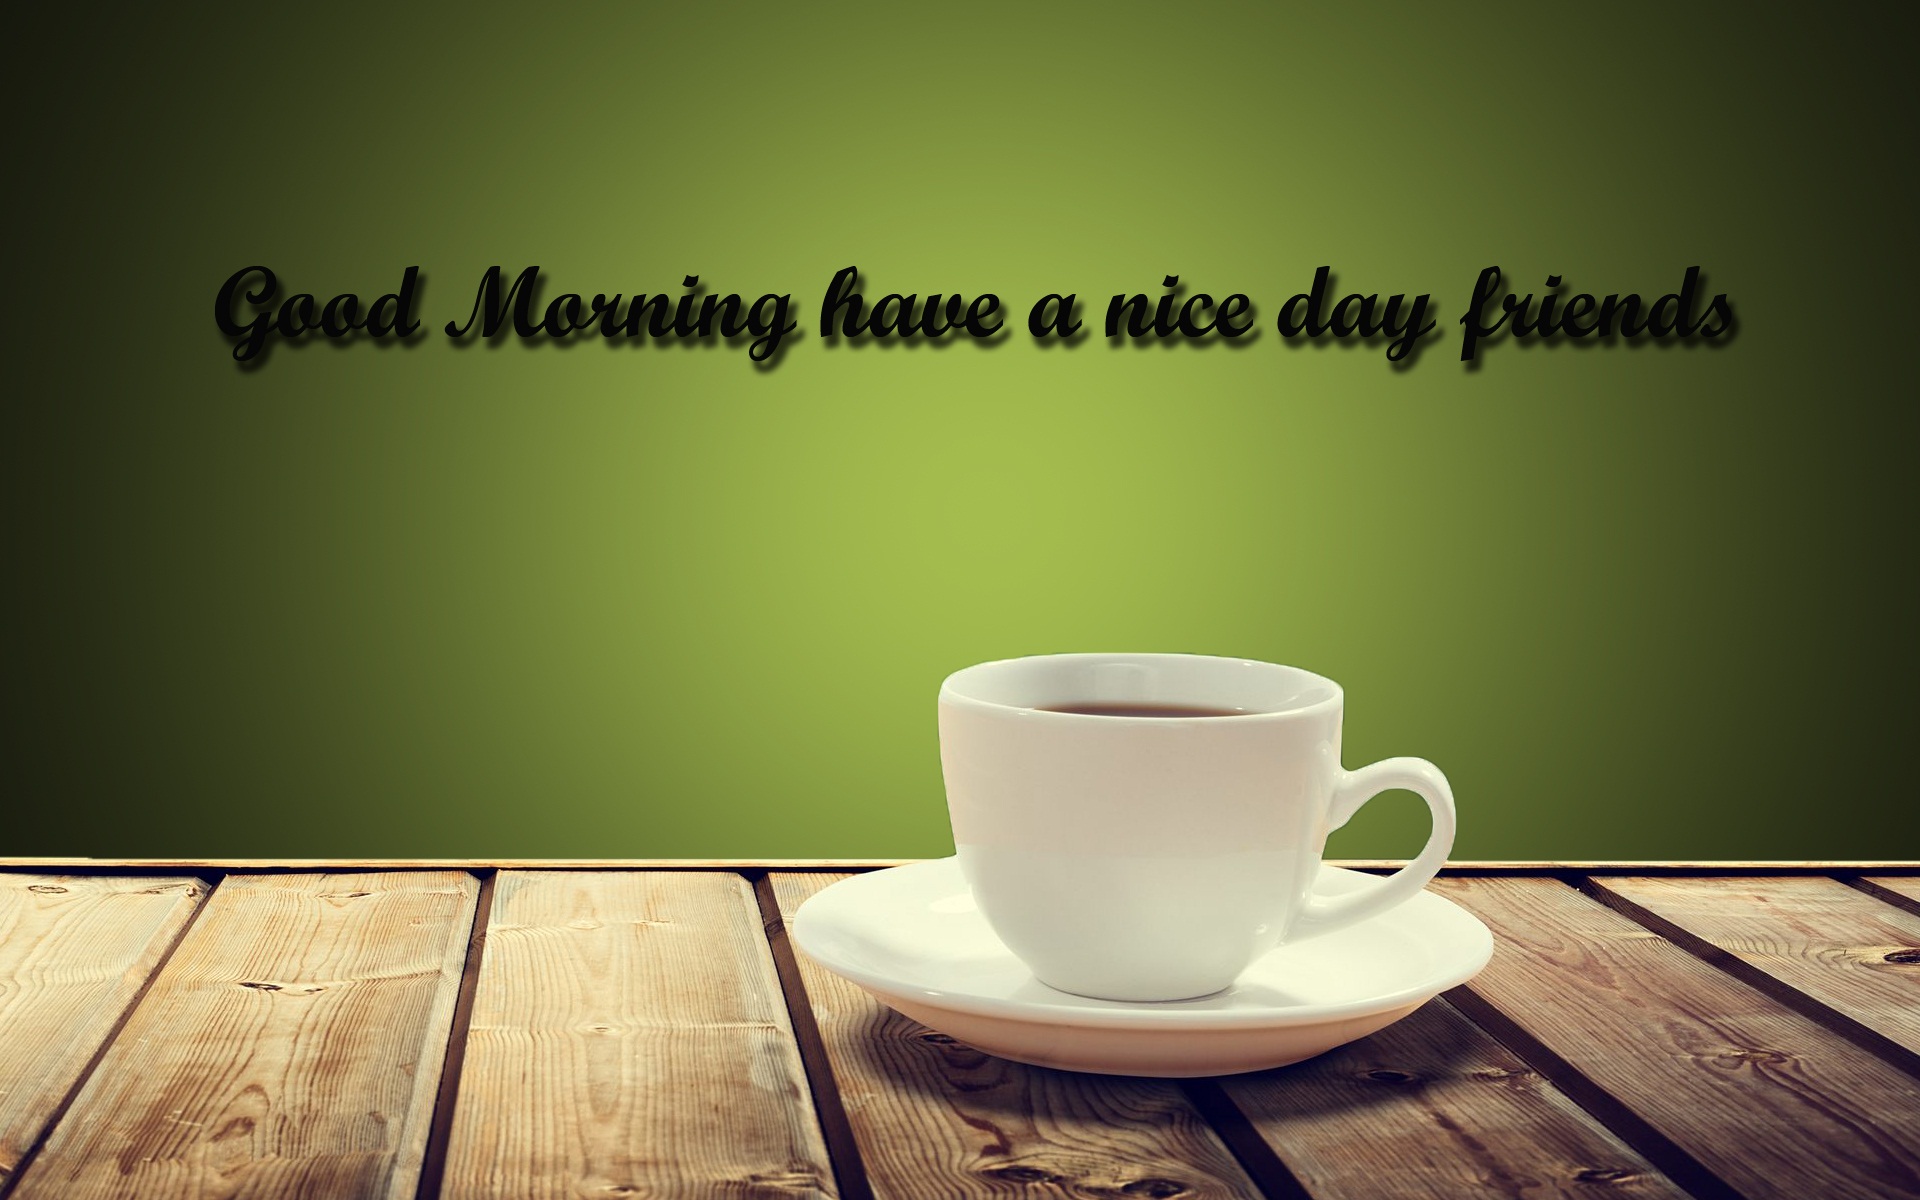 Good Morning Have A Nice Day - Wishes Greetings Good Morning - HD Wallpaper 